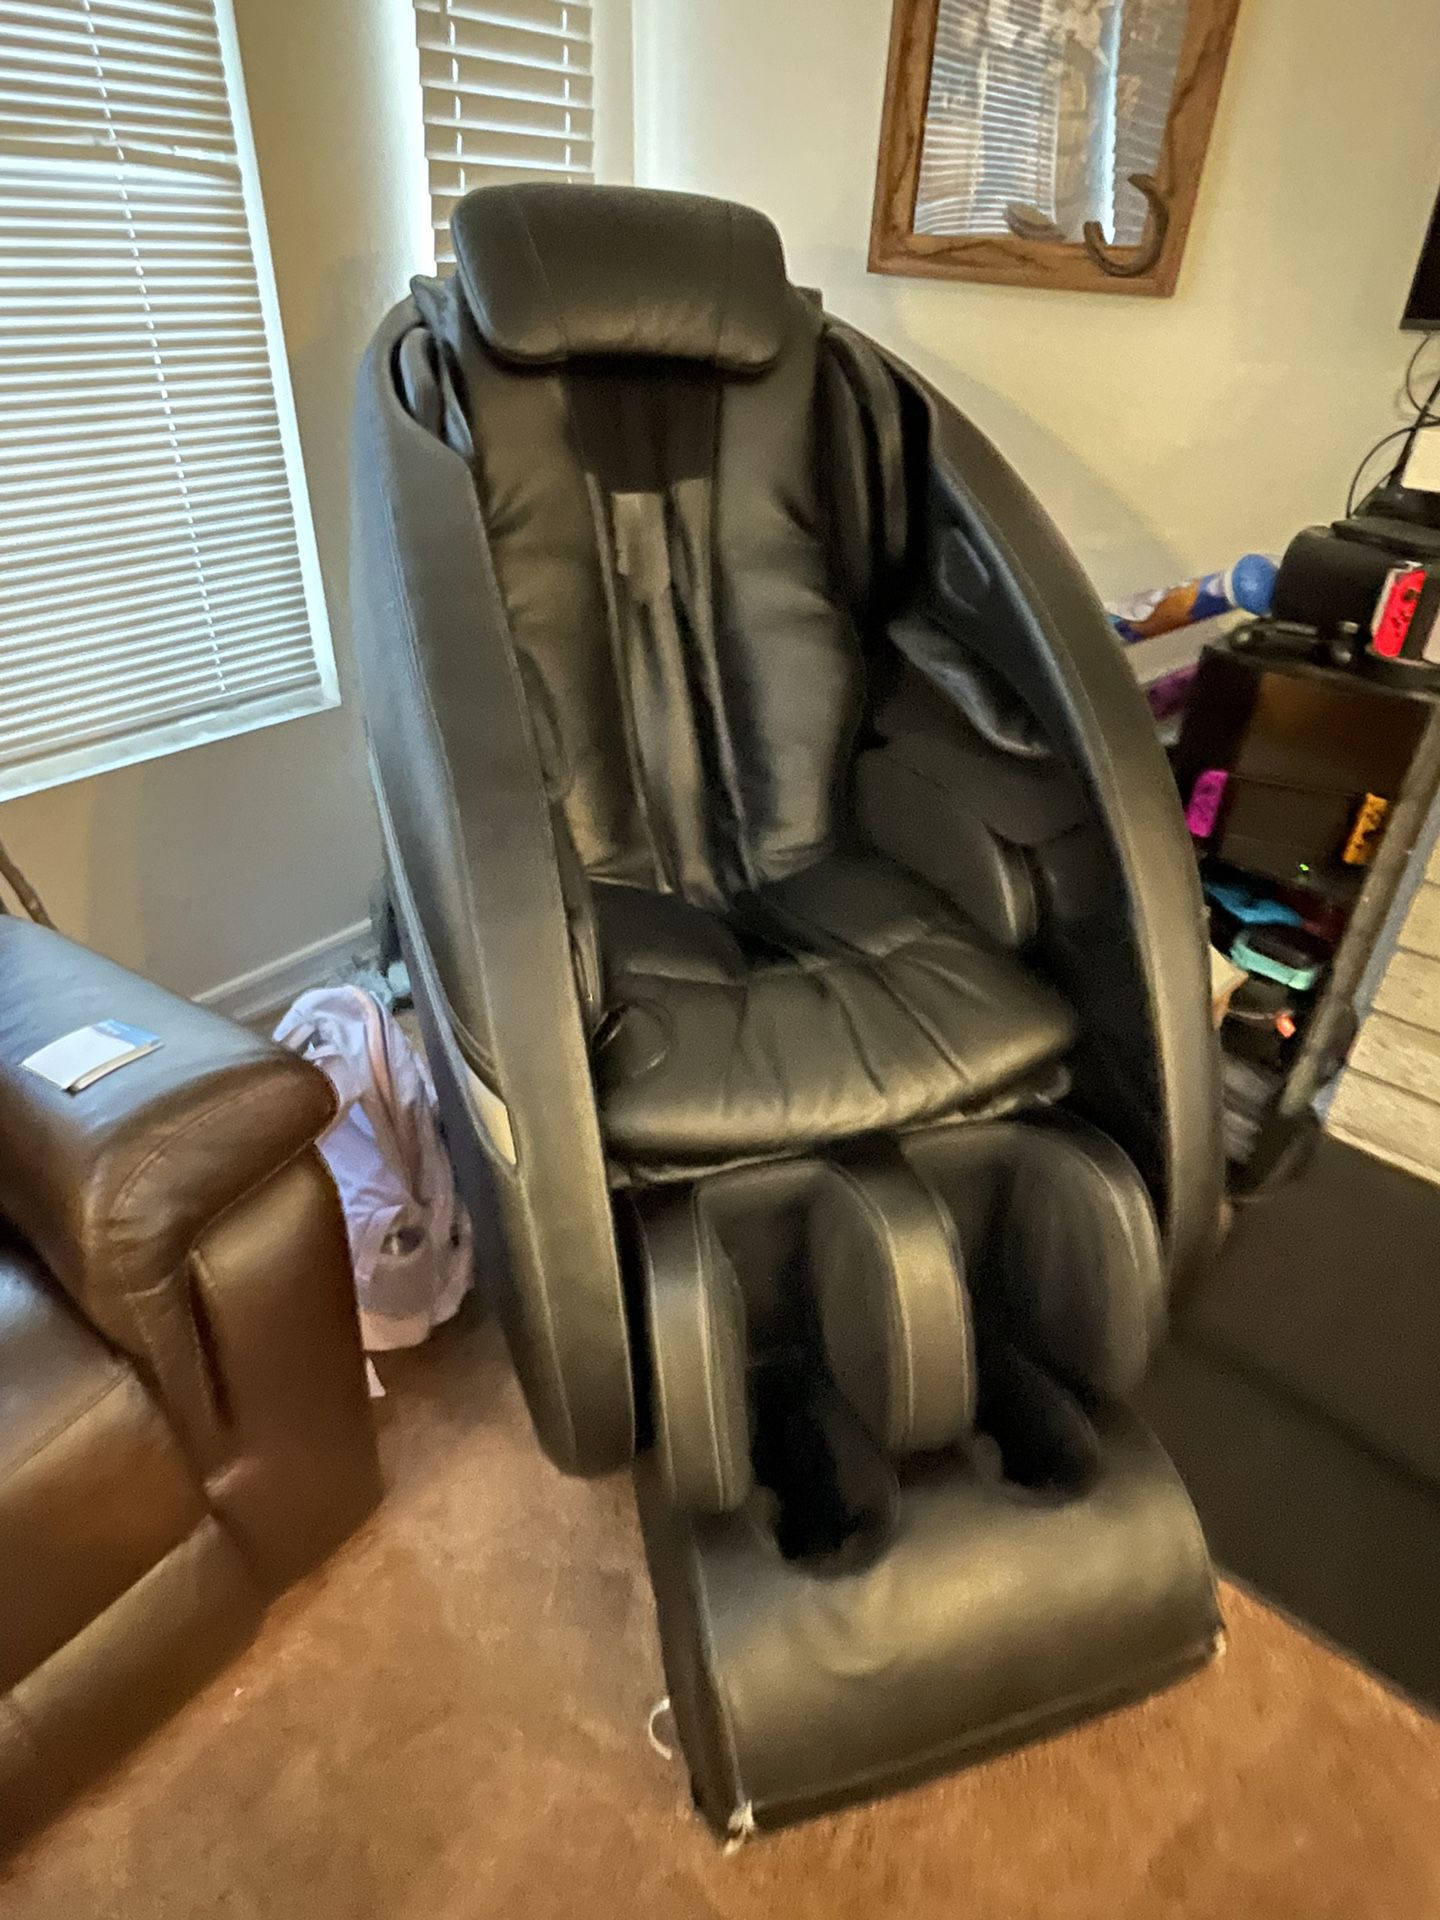 Massage Chair Works Perfectly Bluetooth Paid Over 5,000 